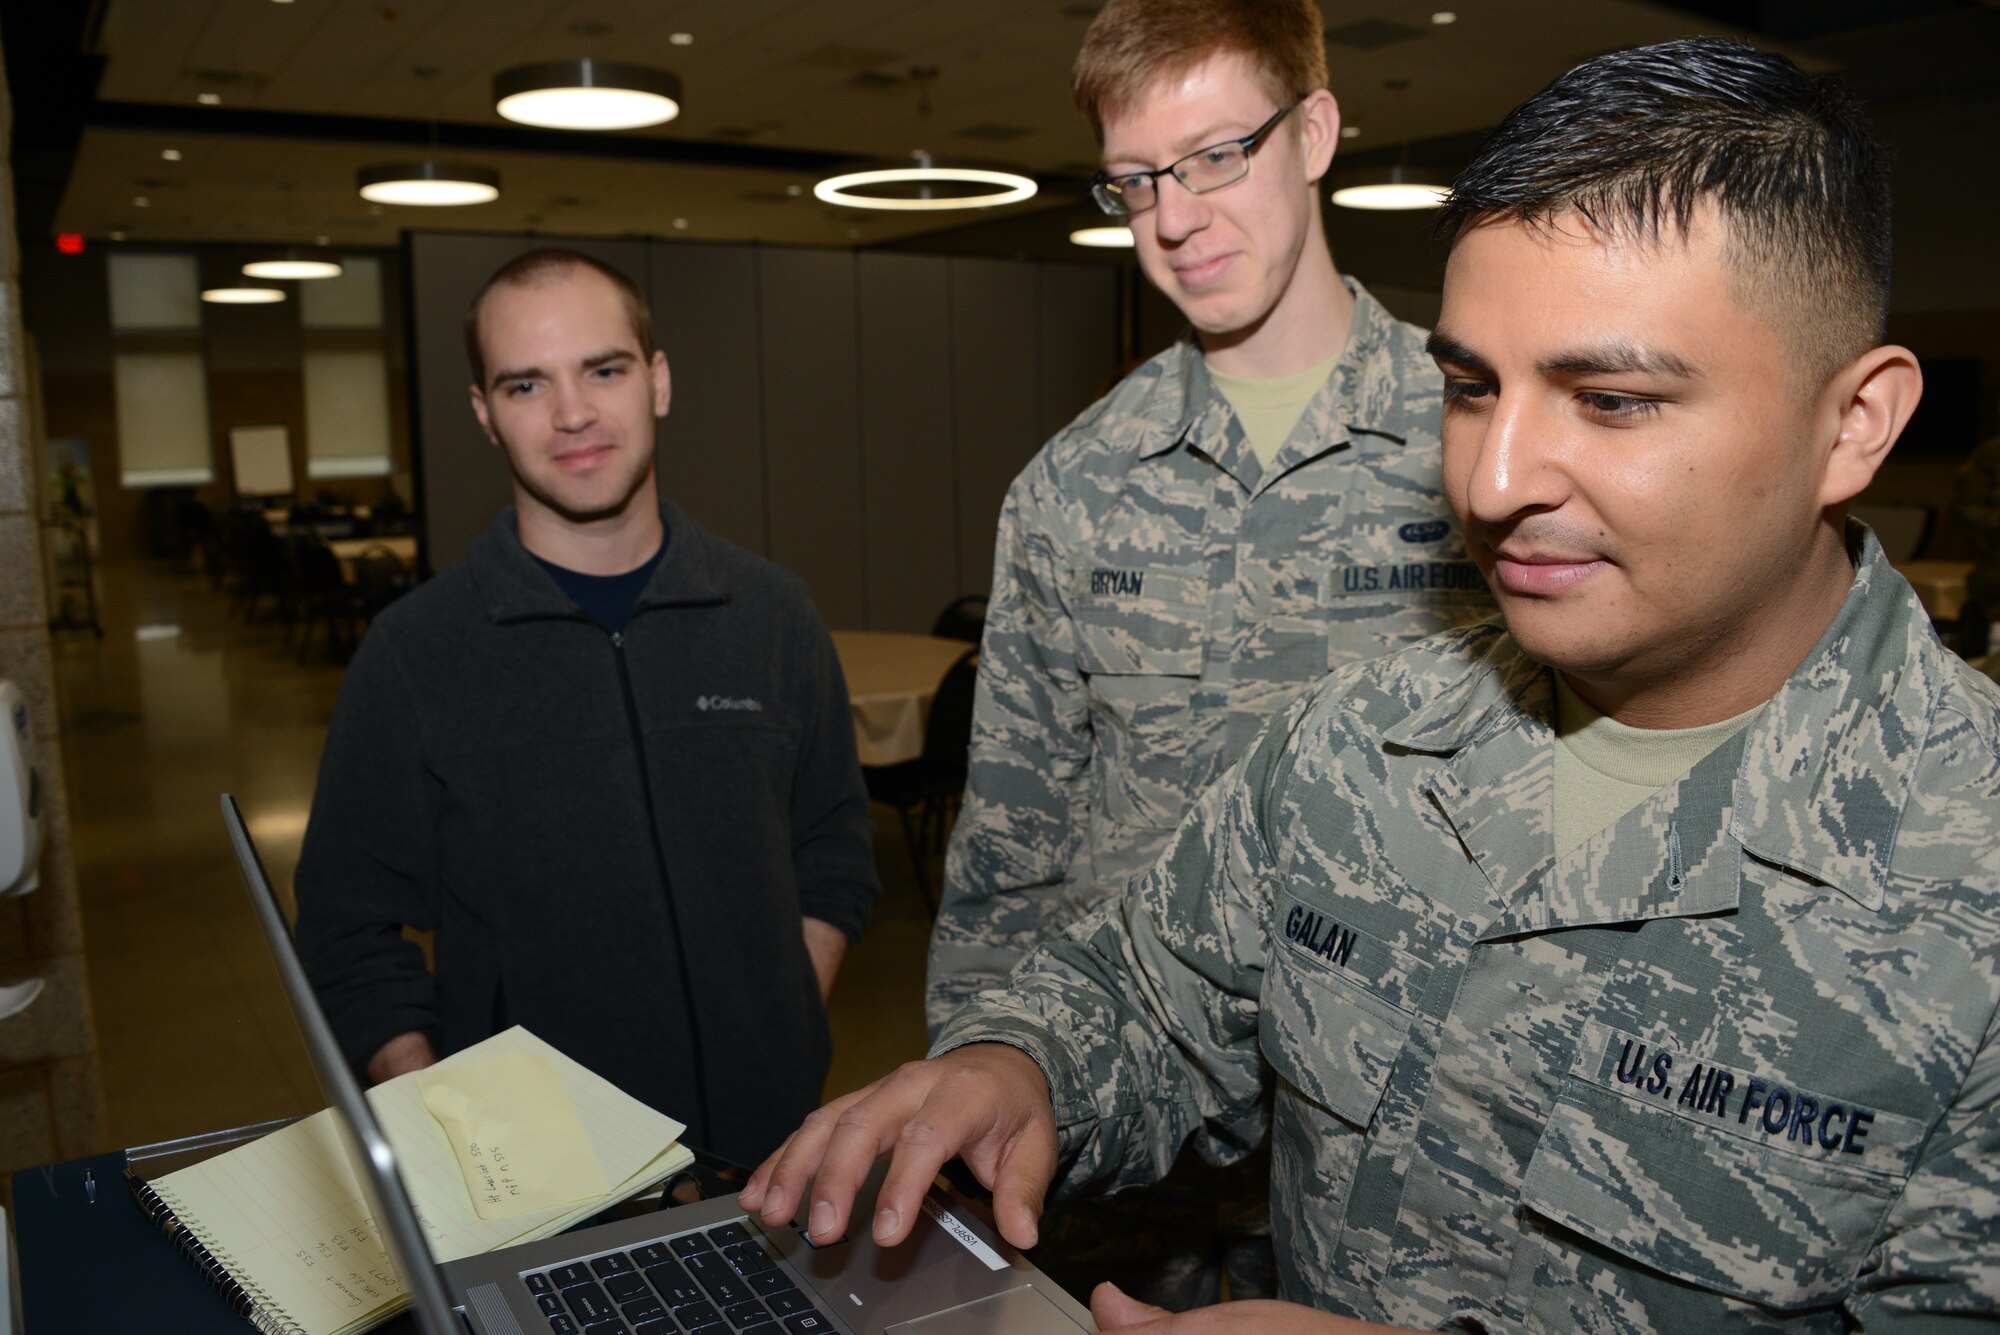 Air Refueling Wing Communications Flight, members from the Iowa Air National Guard work to set up printing capabilities at the Iowa National Guard’s “Joint Task Force West” operations center at the Iowa Air National Guard facility in Sioux City, Iowa.